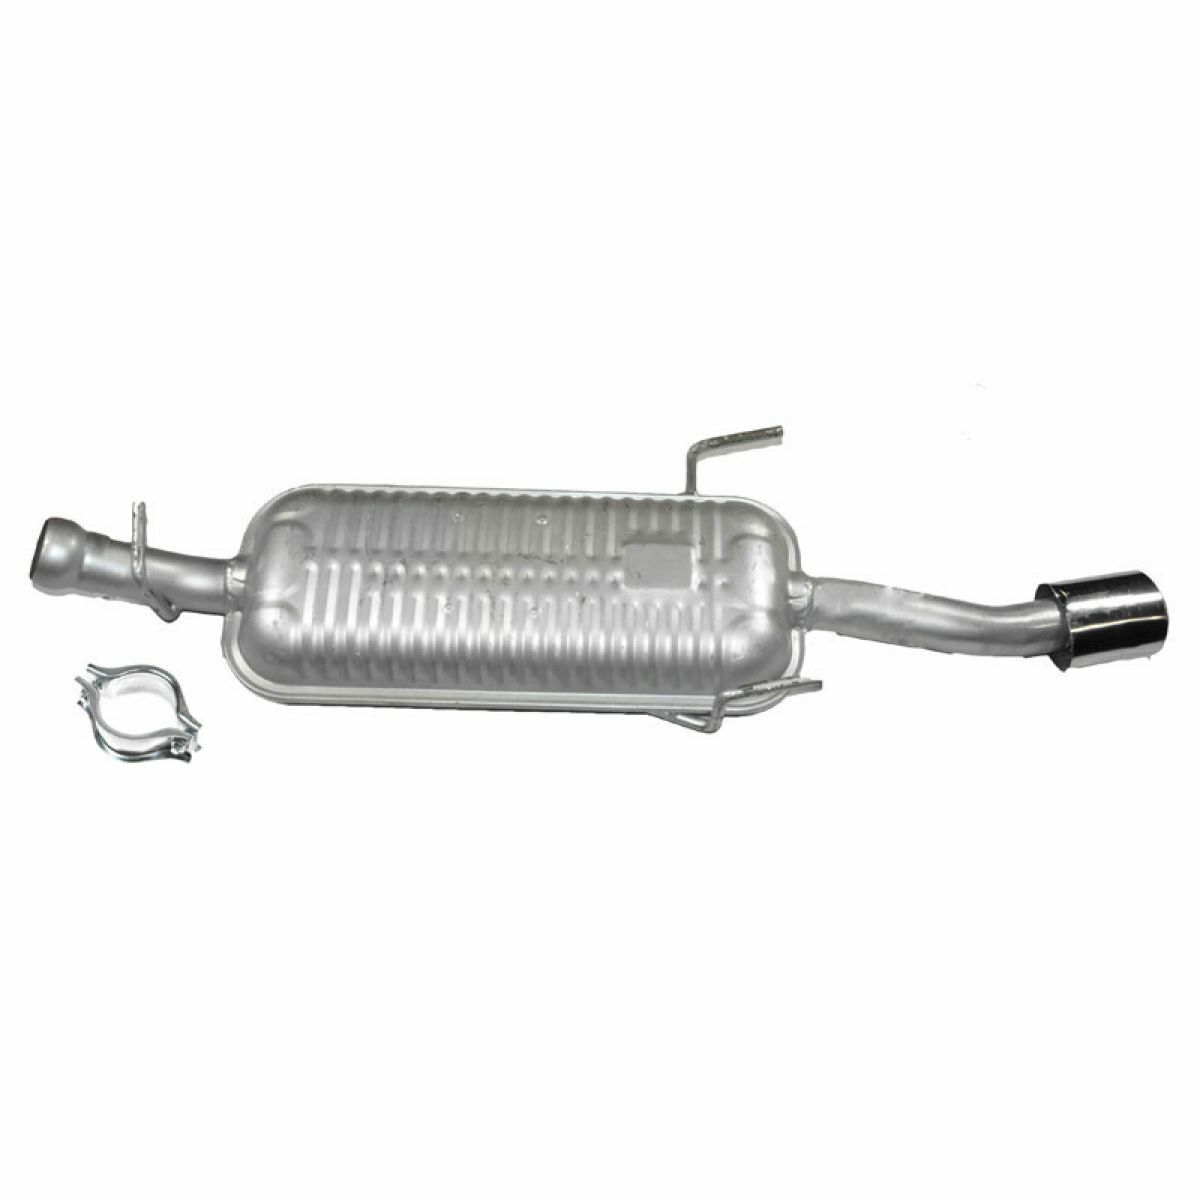 Turbo Rear Exhaust Pipe Muffler With Clamp 4896262 for Saab 9-3 900 L4 2.0L